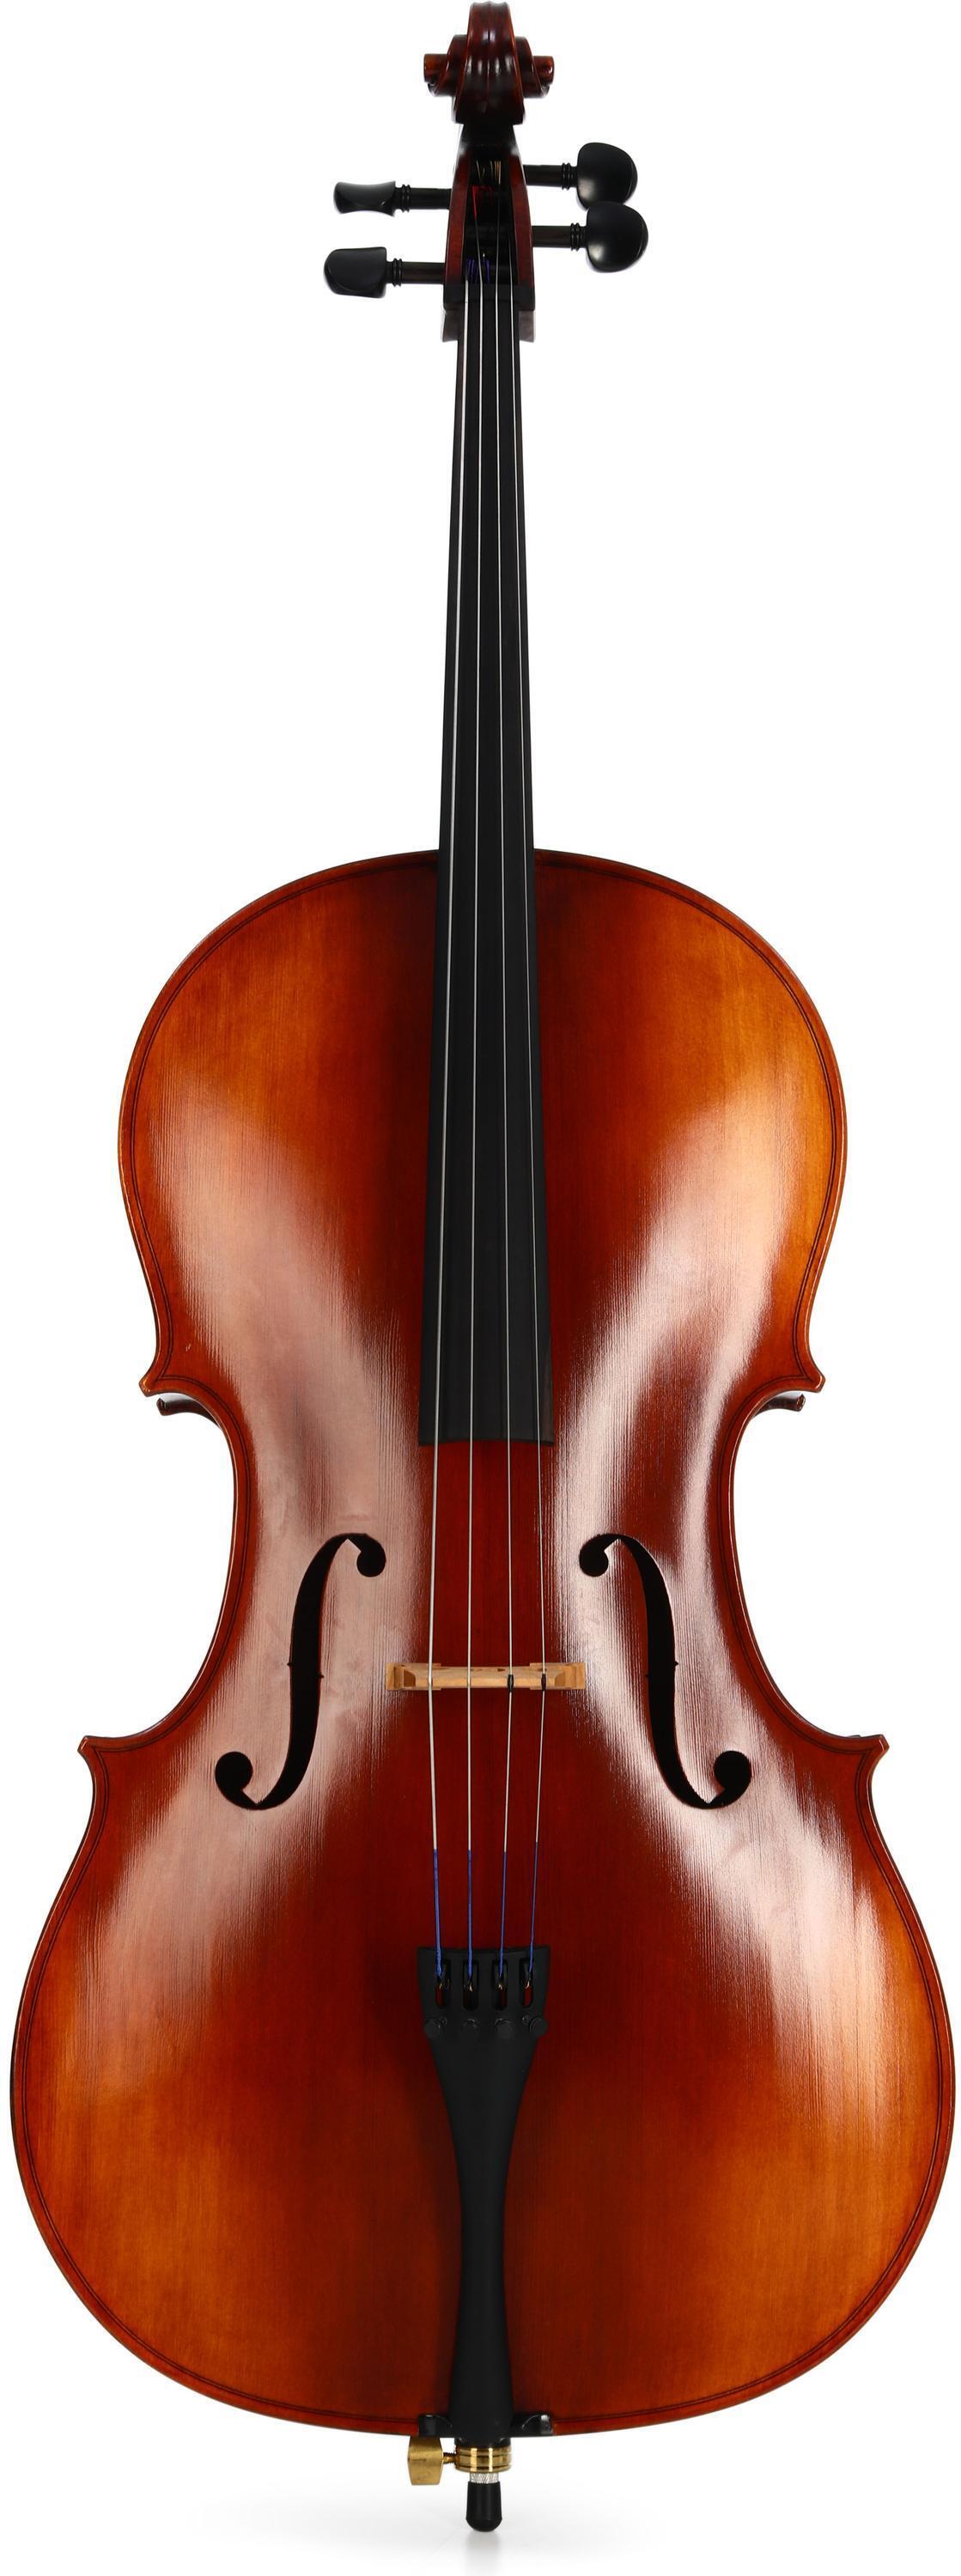 Howard Core A35 Core Academy Cello - 4/4 Size | Sweetwater